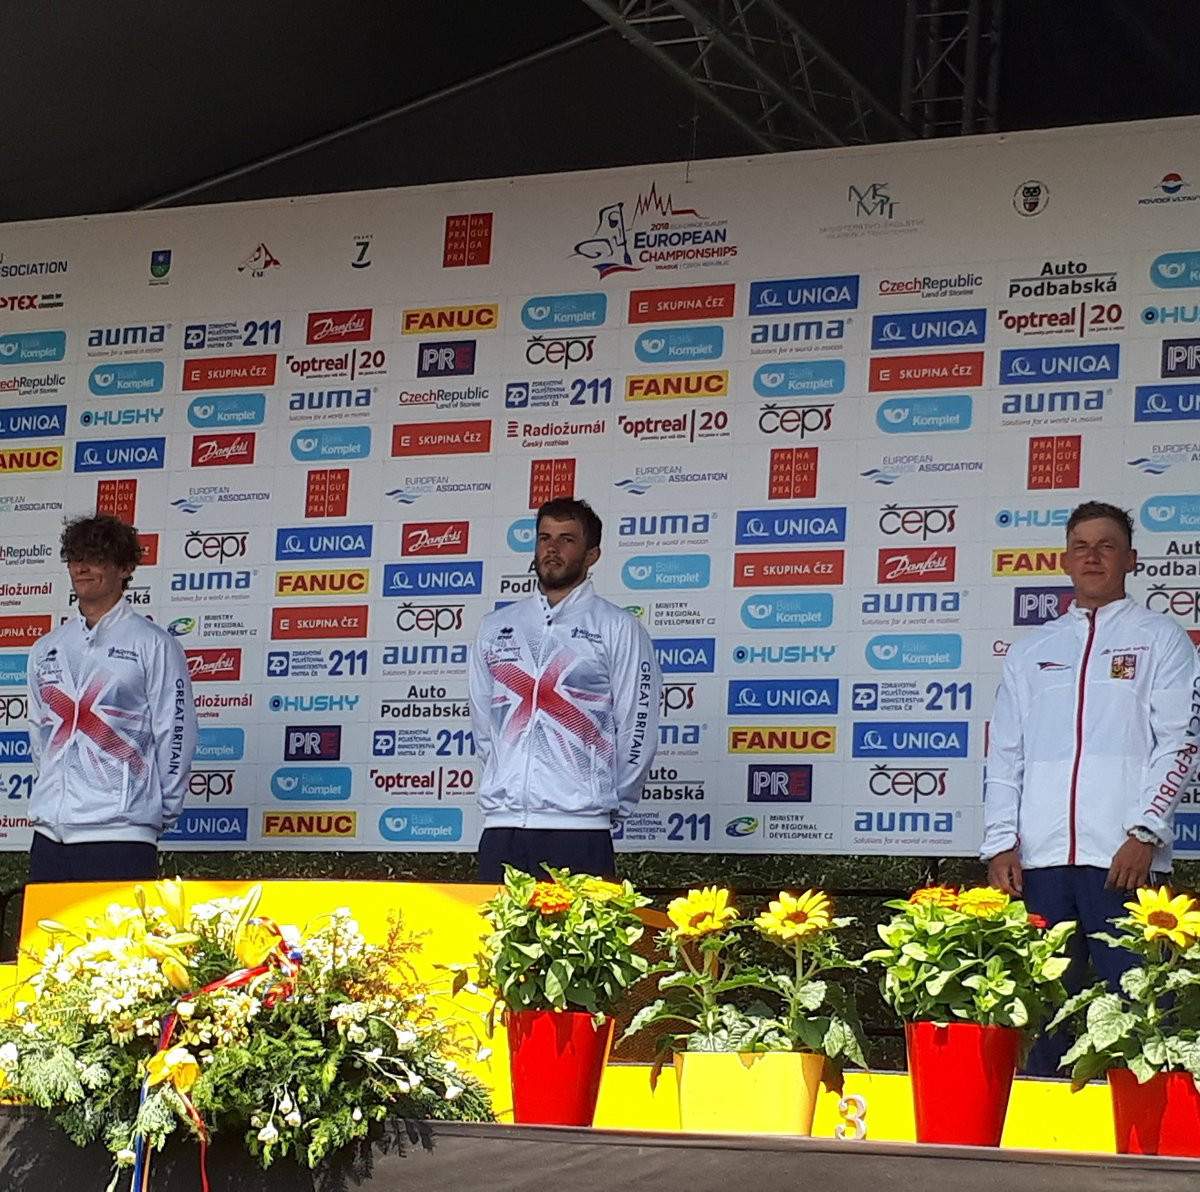 Westley wins first Canoe Slalom European Championships gold medal with C1 victory in Prague